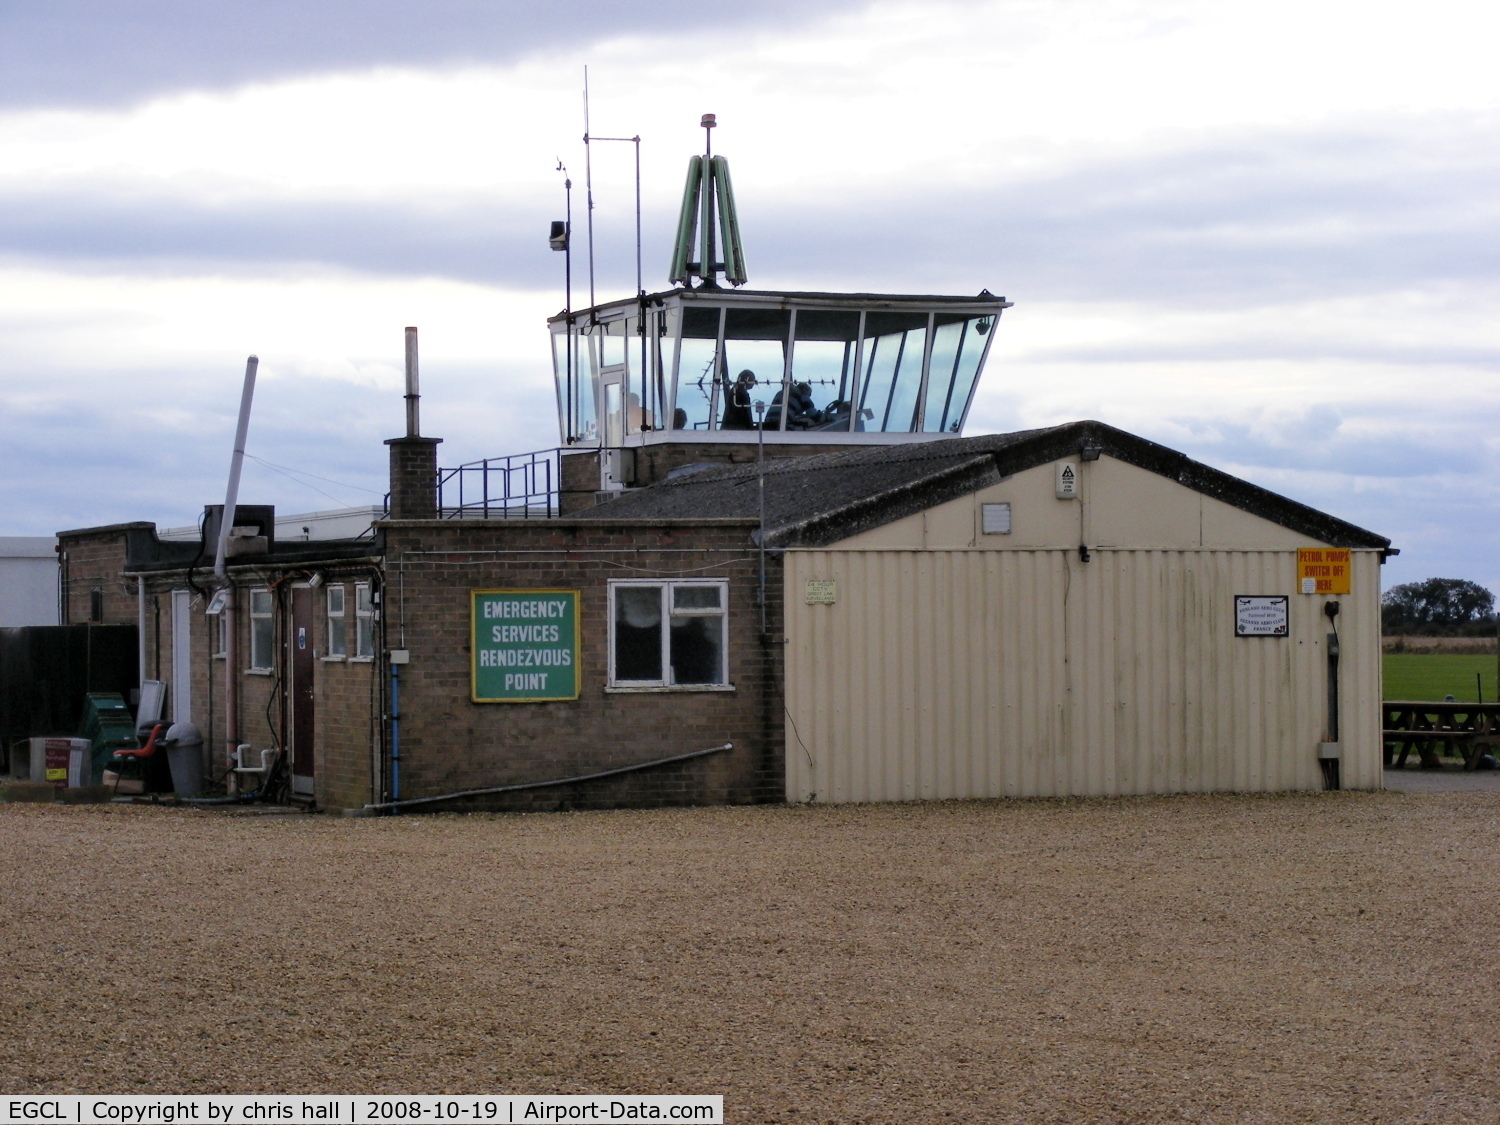 Fenland Airfield Airport, Spalding, England United Kingdom (EGCL) - The tower at Fenland